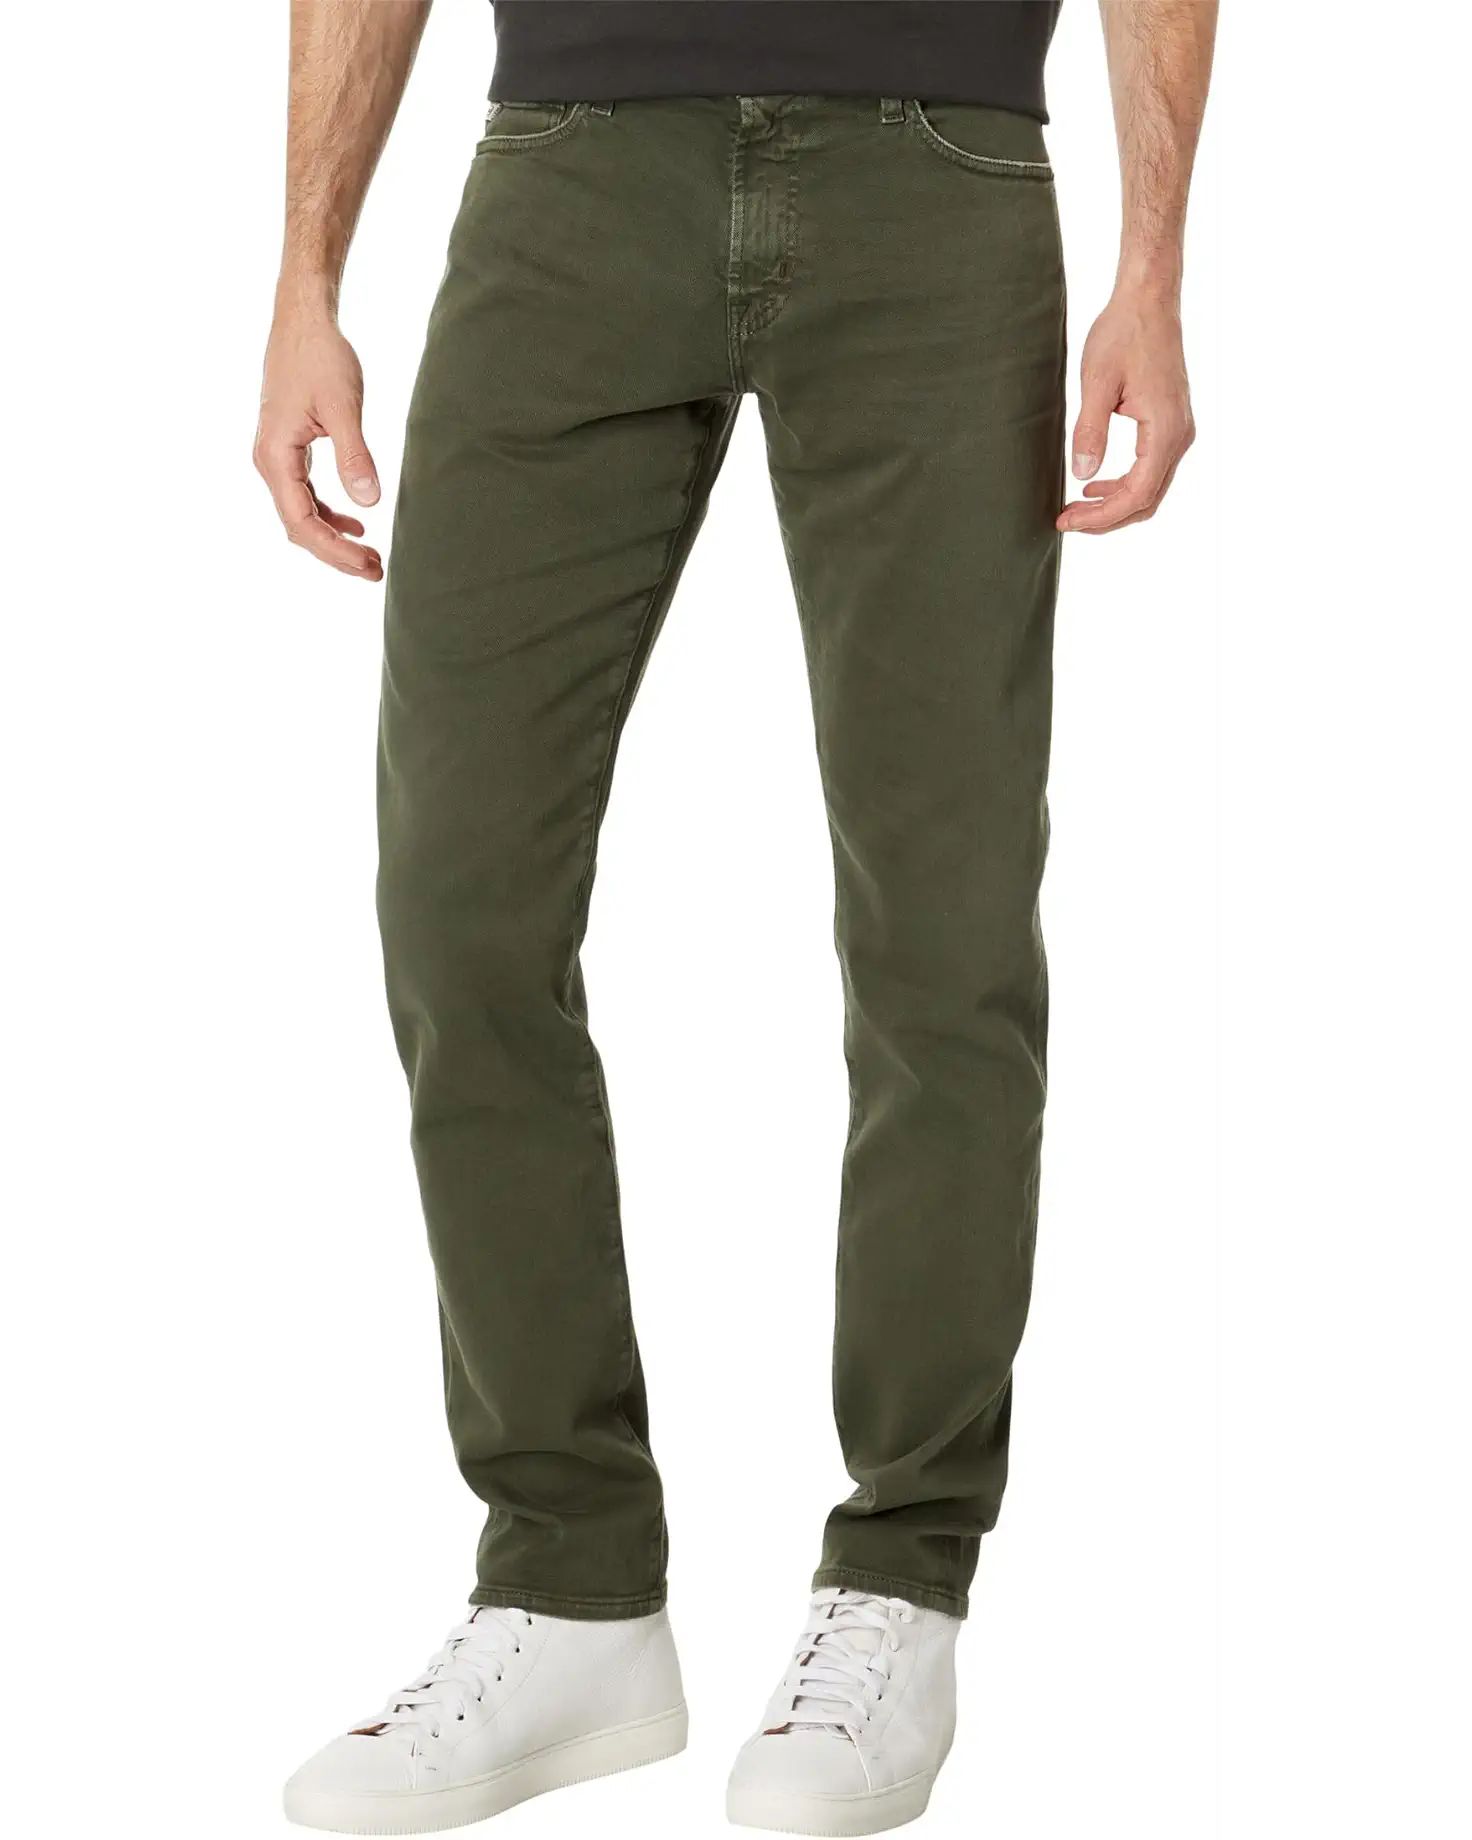 Tellis Slim Fit Jeans in 7 Years Sulfur Forest Mist | Zappos